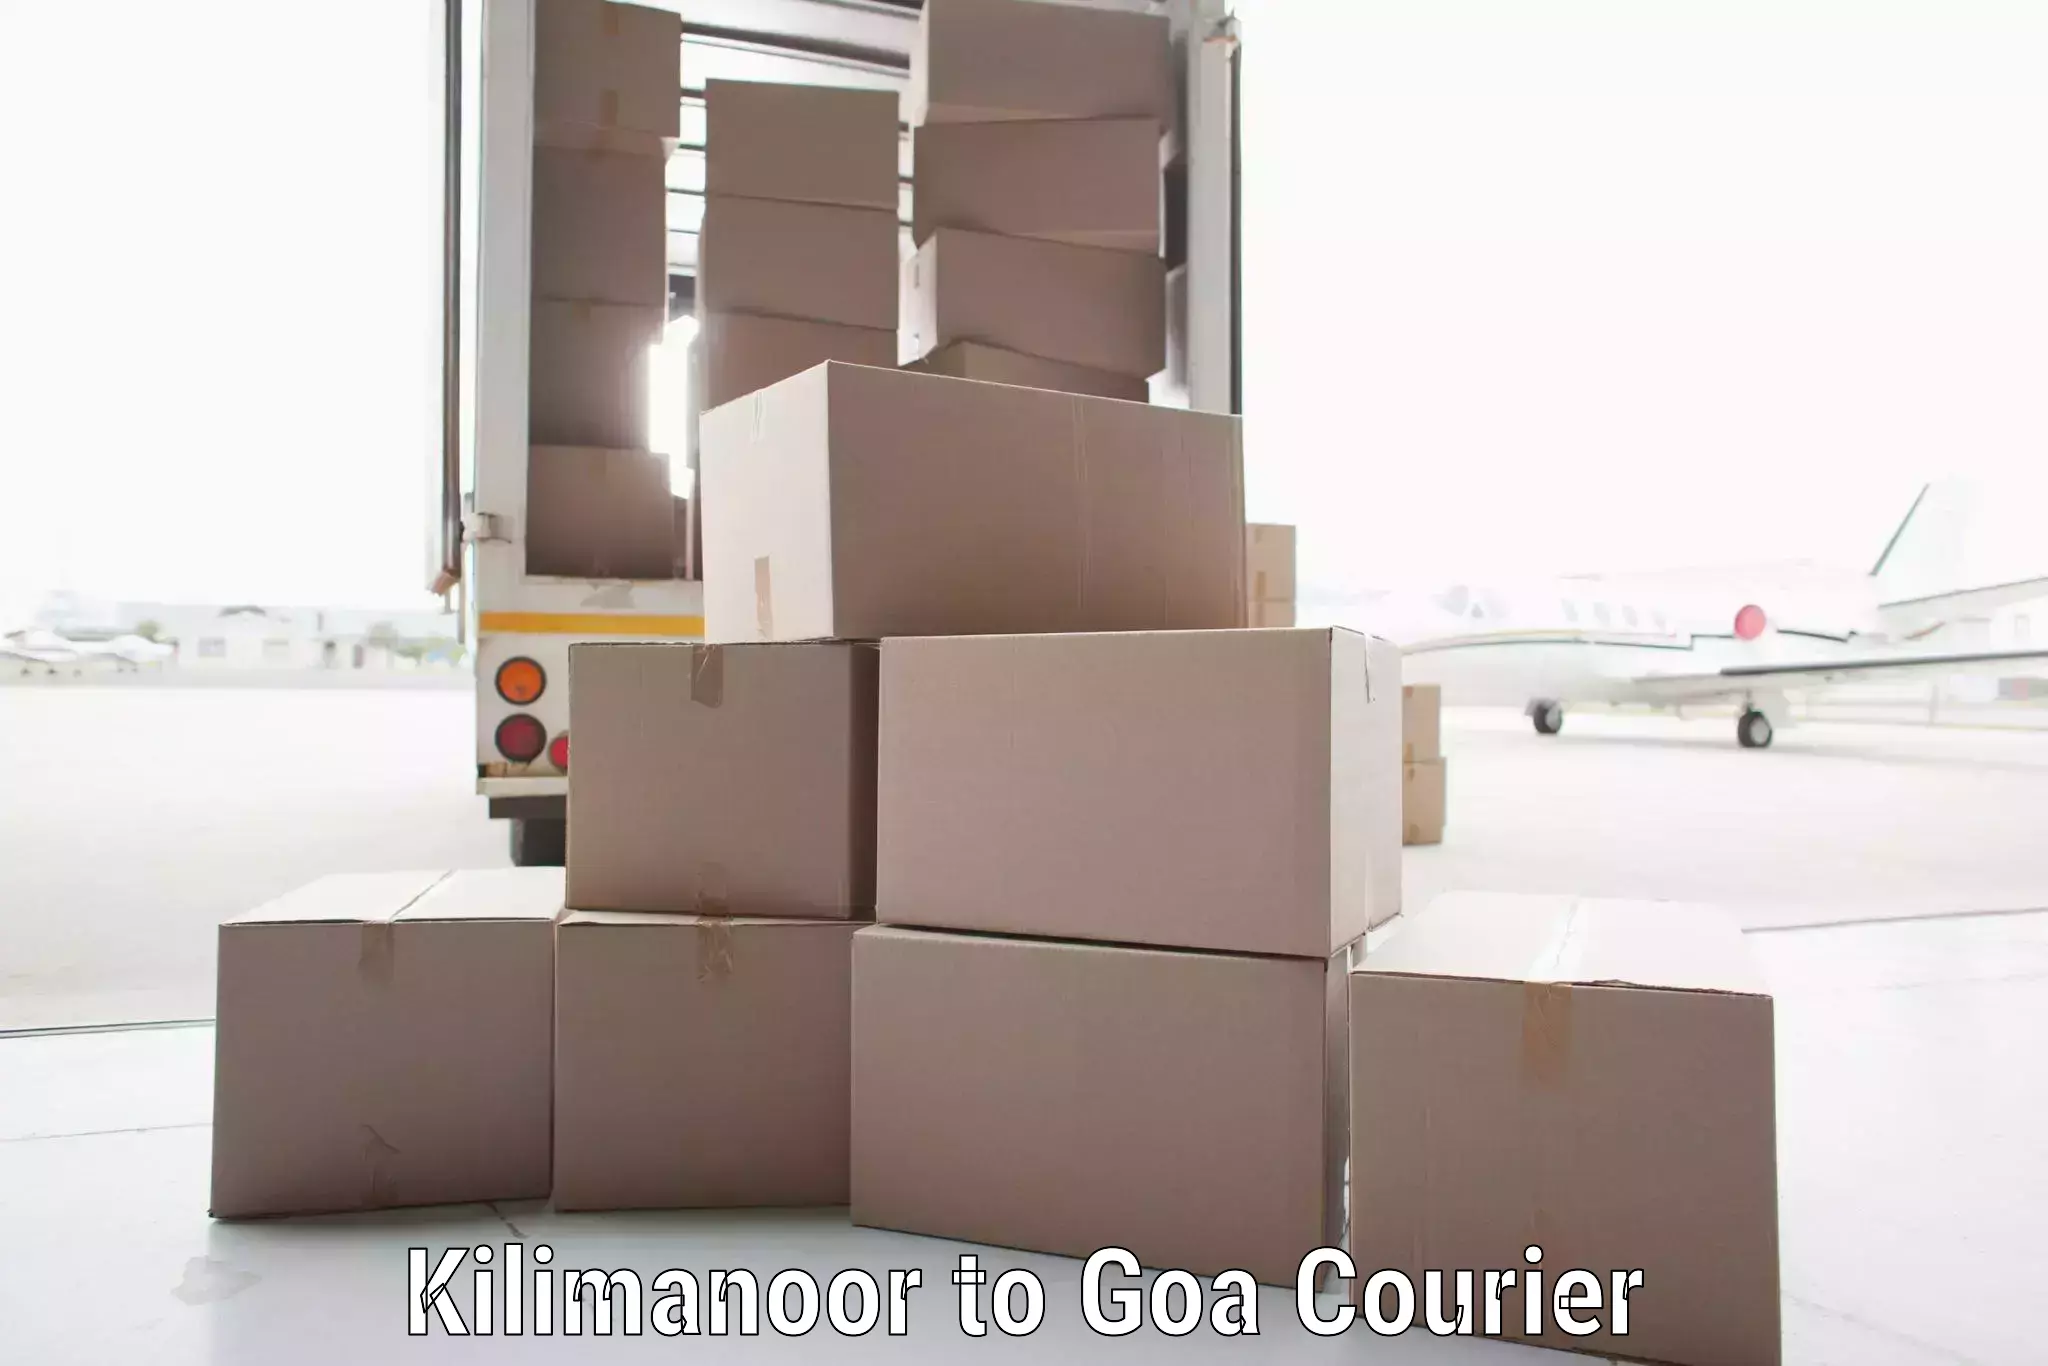 Parcel service for businesses Kilimanoor to Panaji